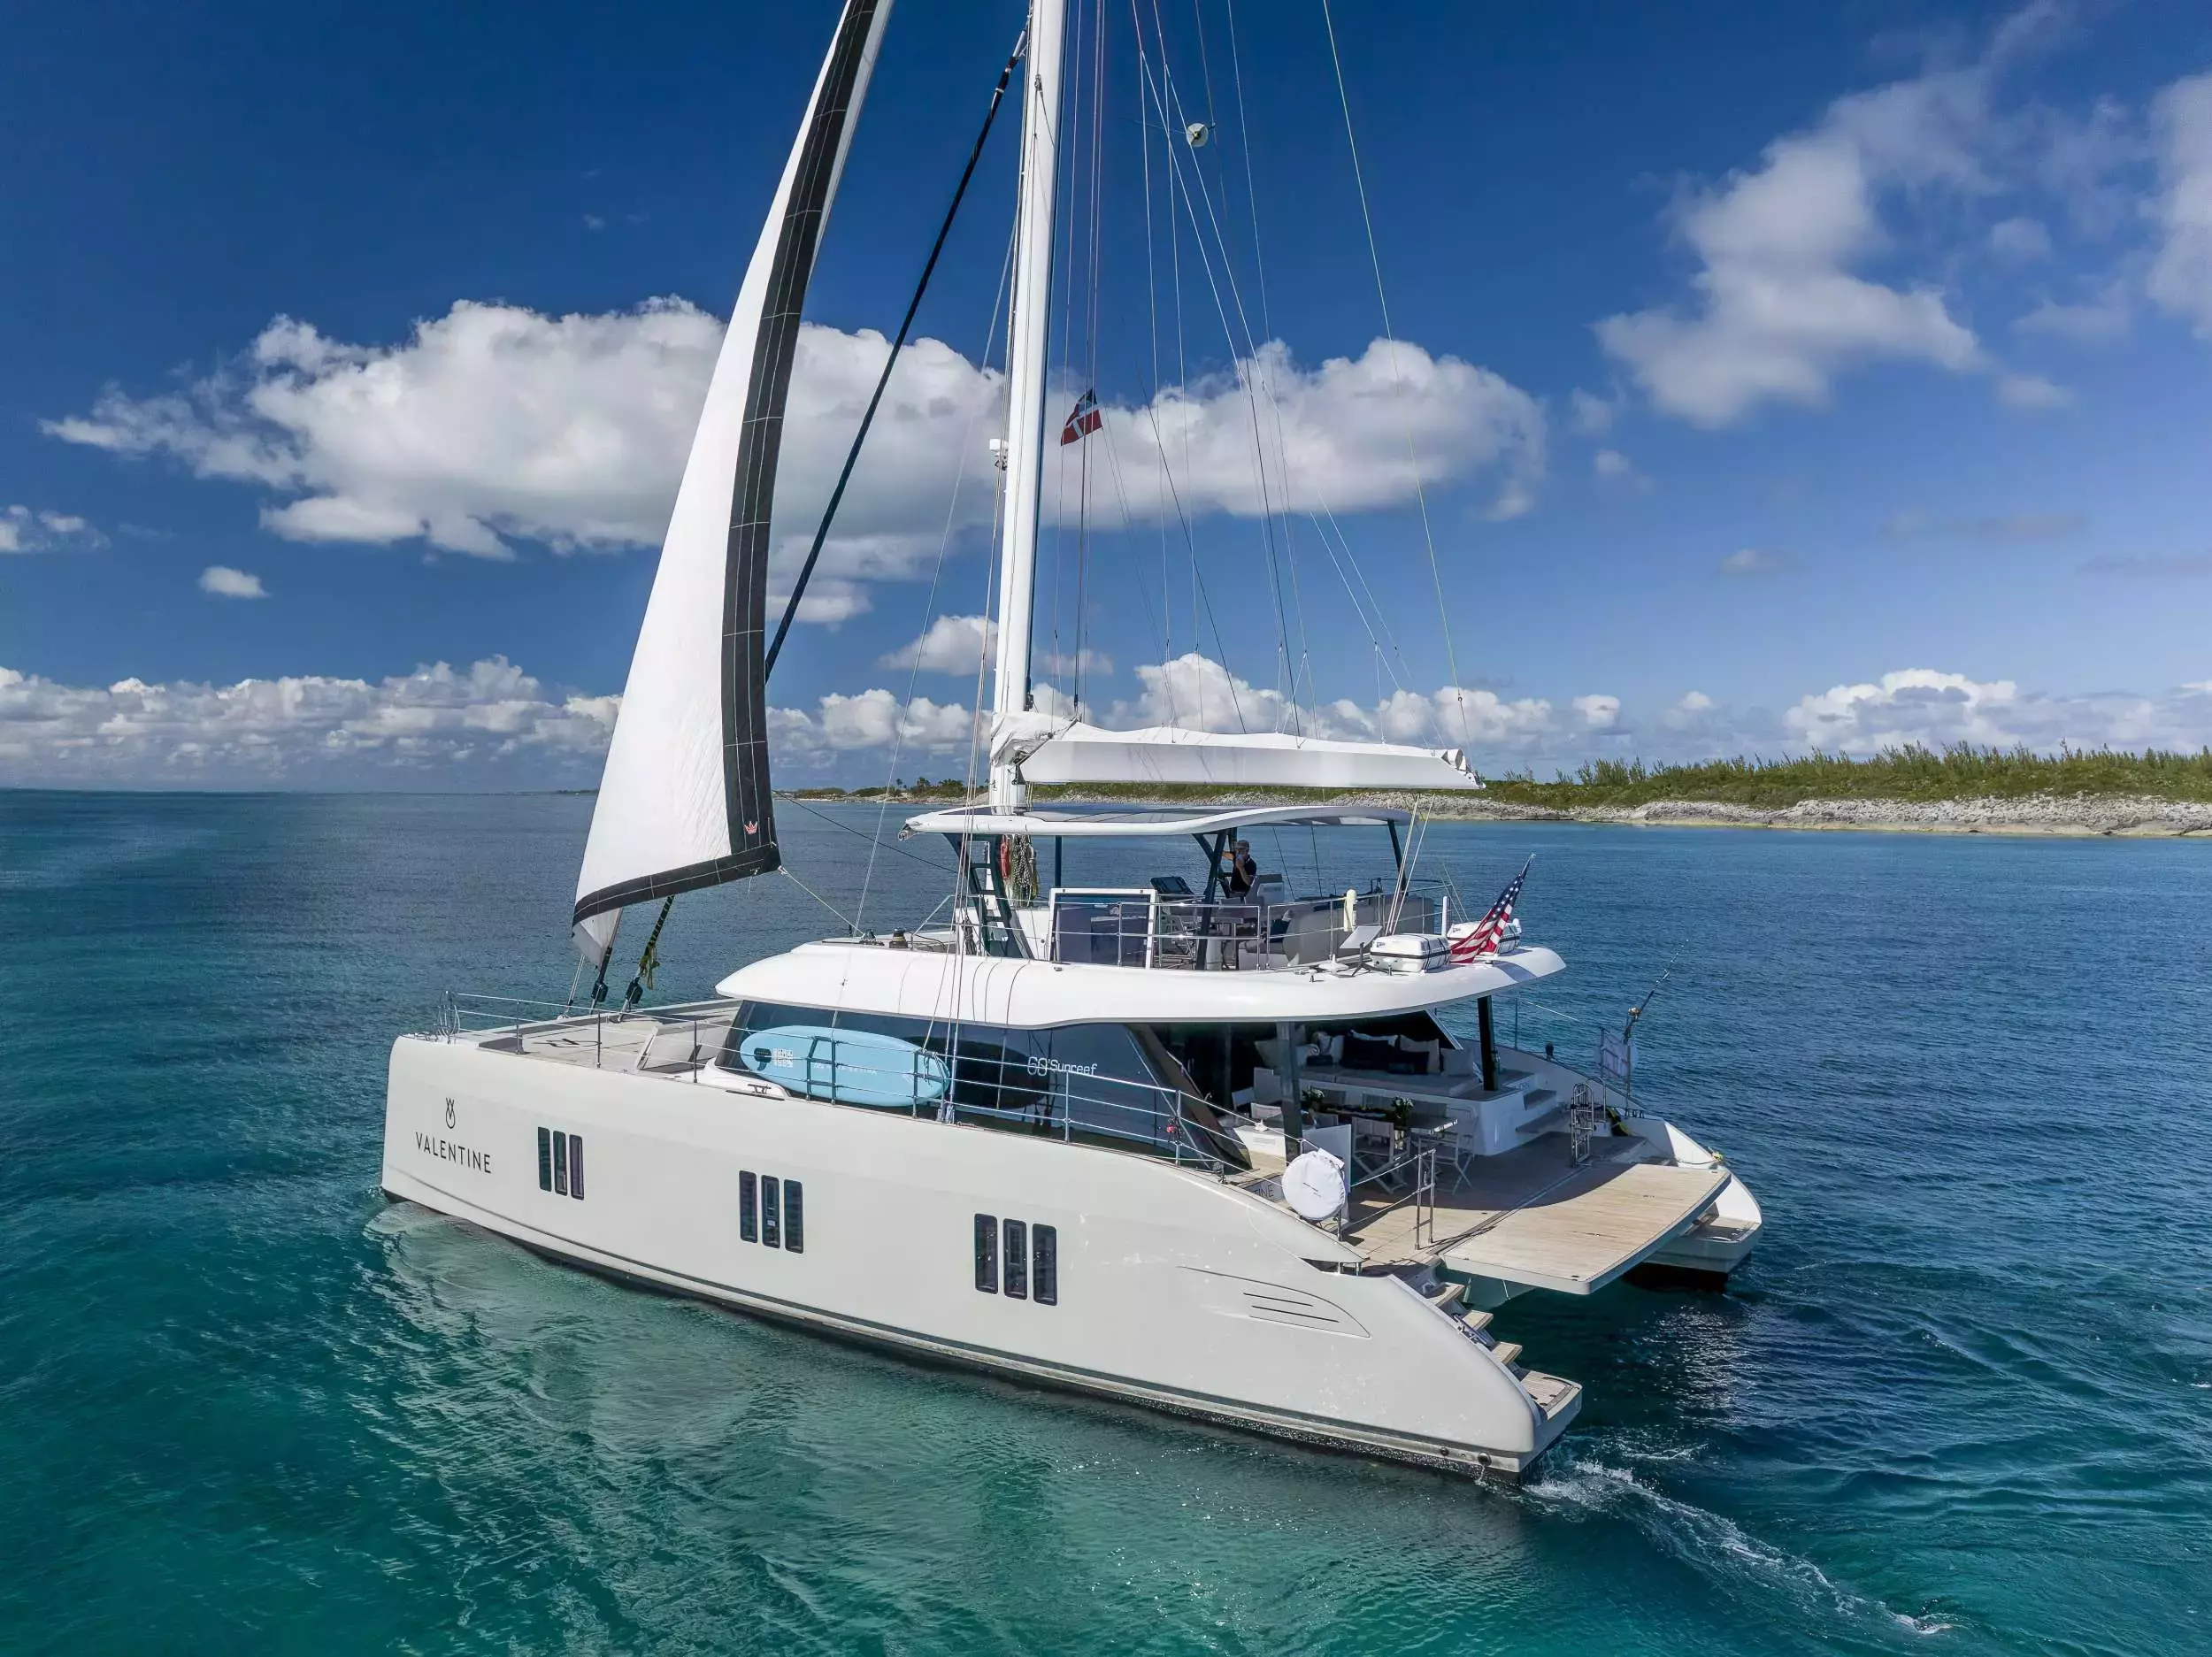 Valentine by Sunreef Yachts - Special Offer for a private Power Catamaran Charter in Tortola with a crew